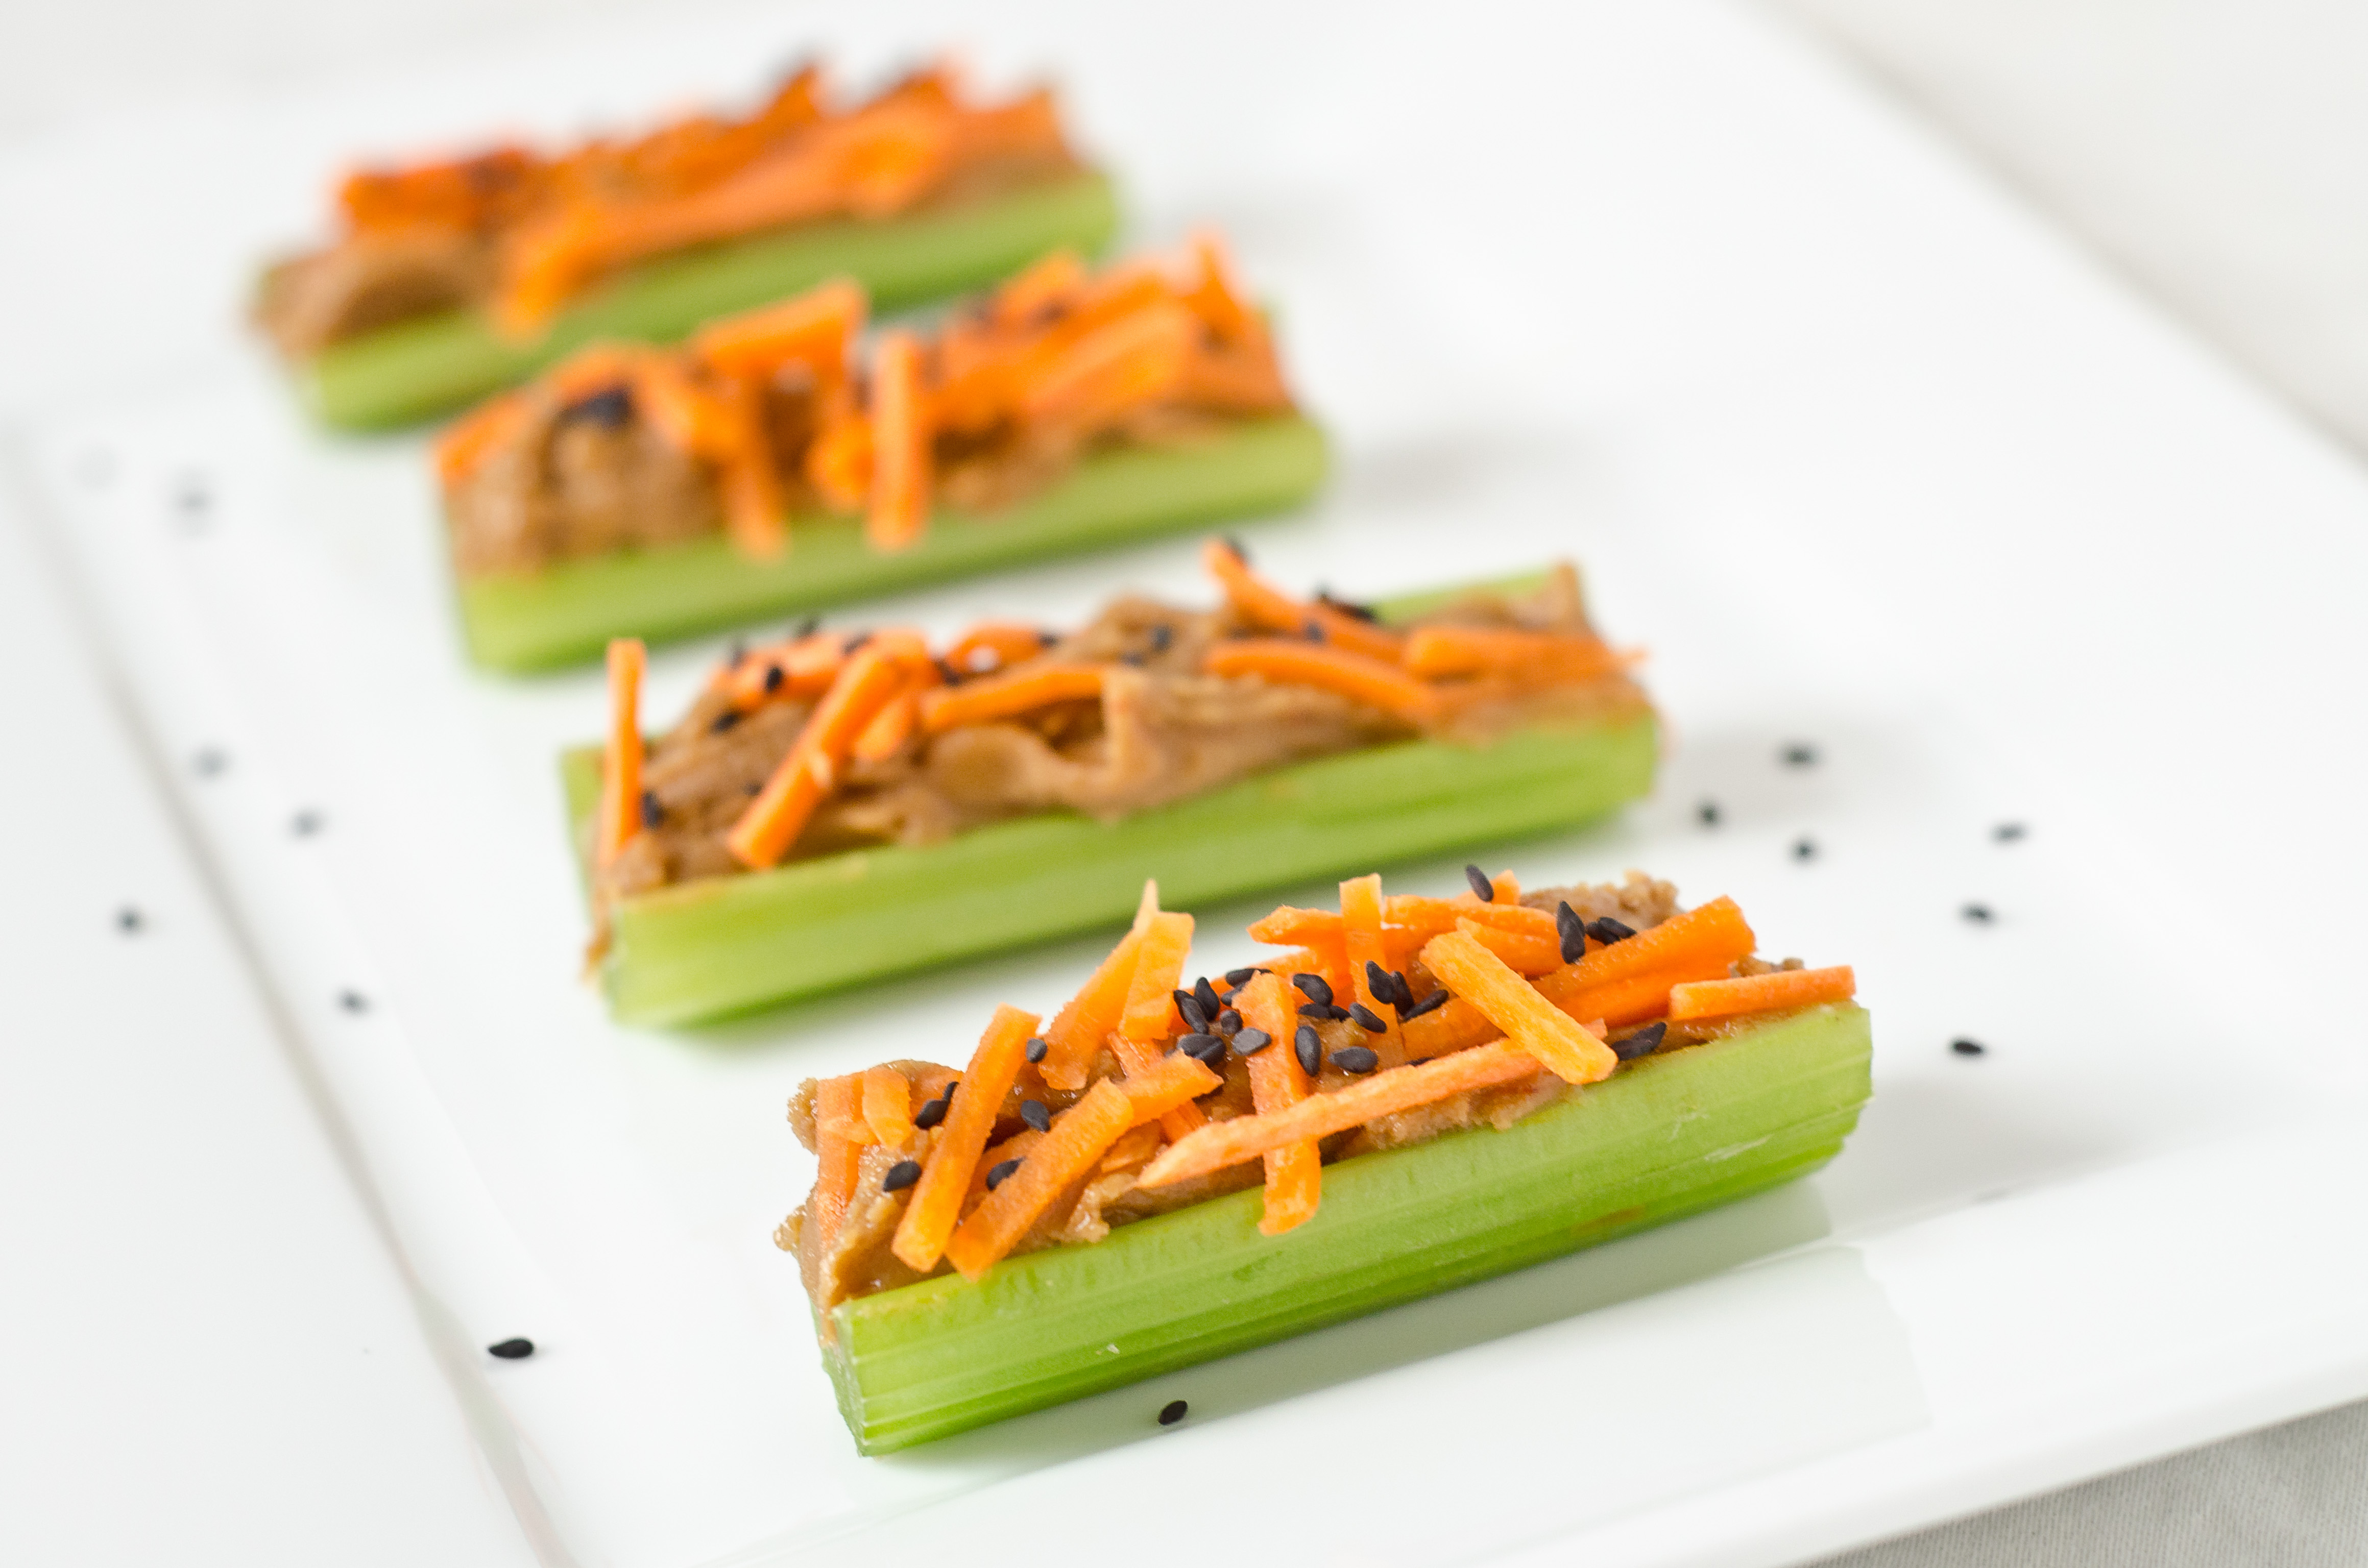 65 Healthy Vegetarian Snack Ideas - The Fig Tree